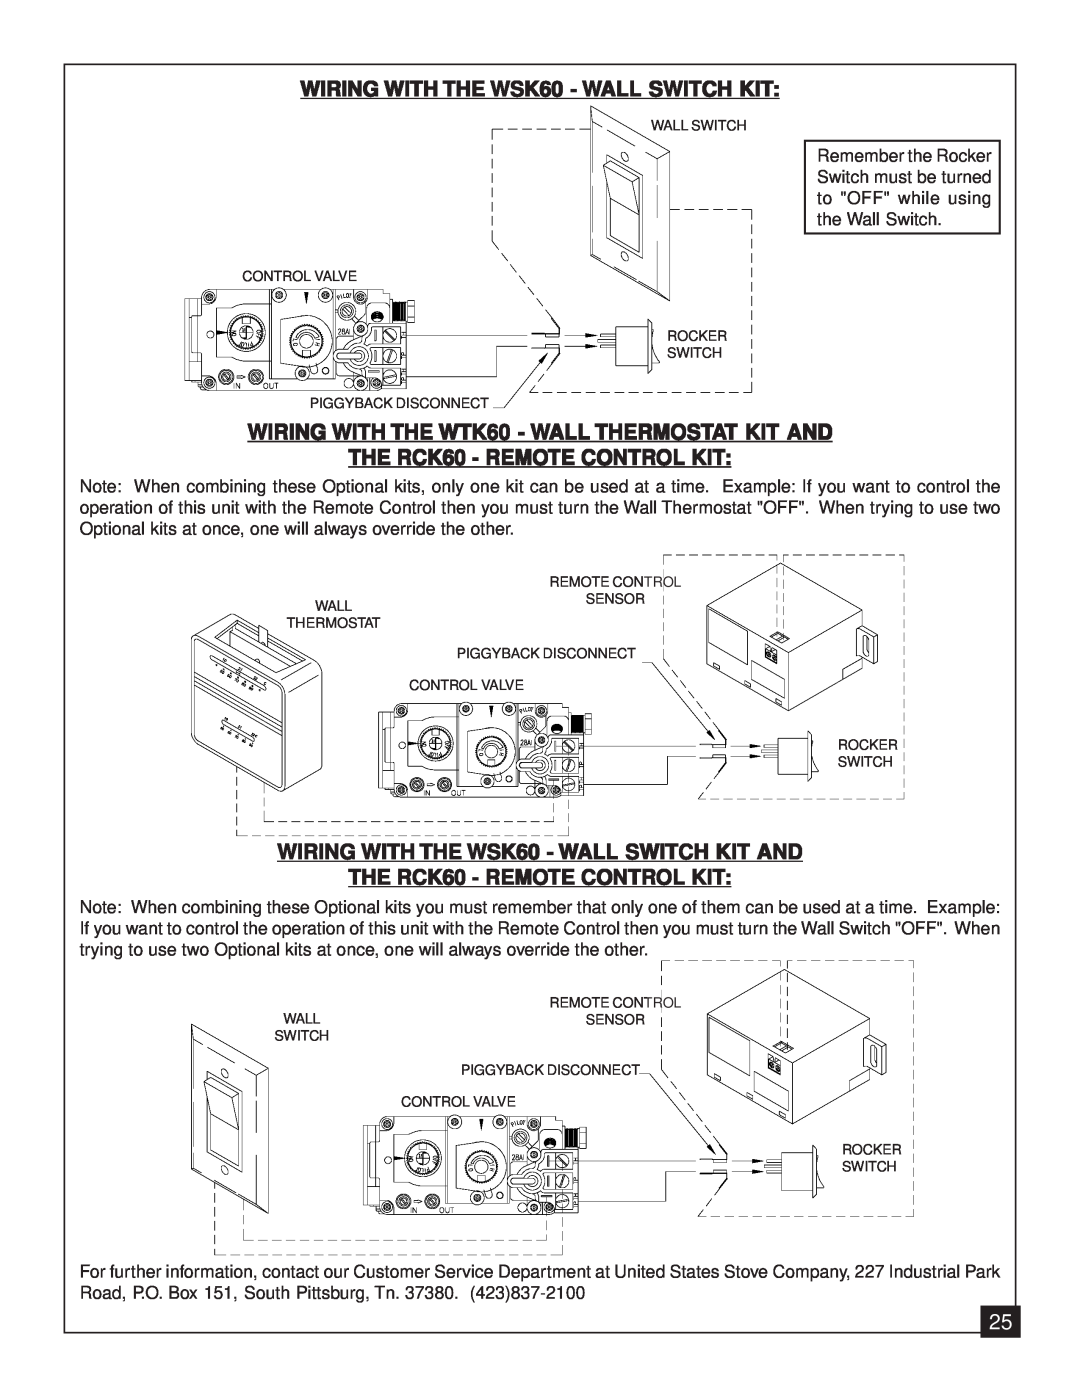 United States Stove 9947 WIRING WITH THE WSK60 - WALL SWITCH KIT, WIRING WITH THE WTK60 - WALL THERMOSTAT KIT AND 